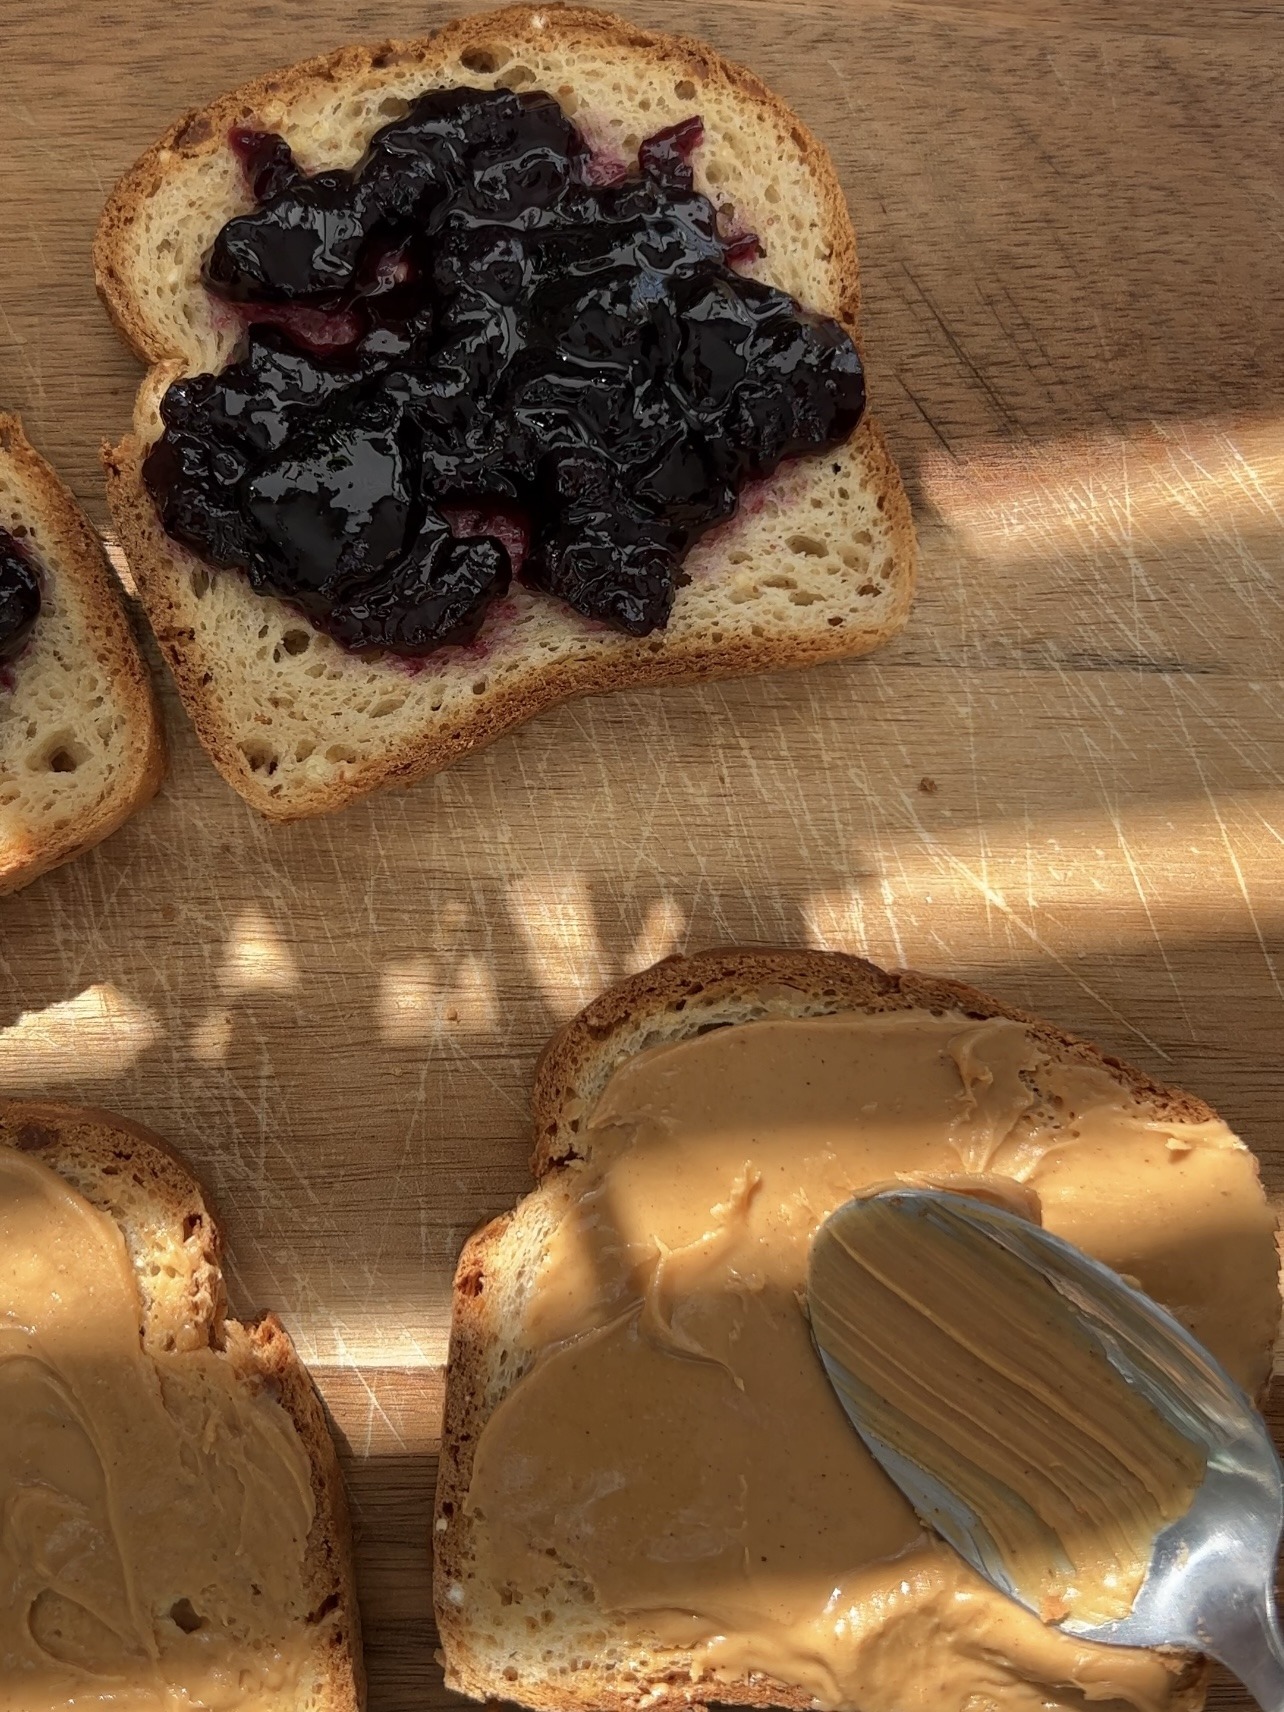 make two peanut butter and jelly sandwiches by spreading the peanut butter on two slices of bread, jelly on the other two slices of bread, and then putting each slice of bread with peanut butter on top of each slice of bread with jelly.